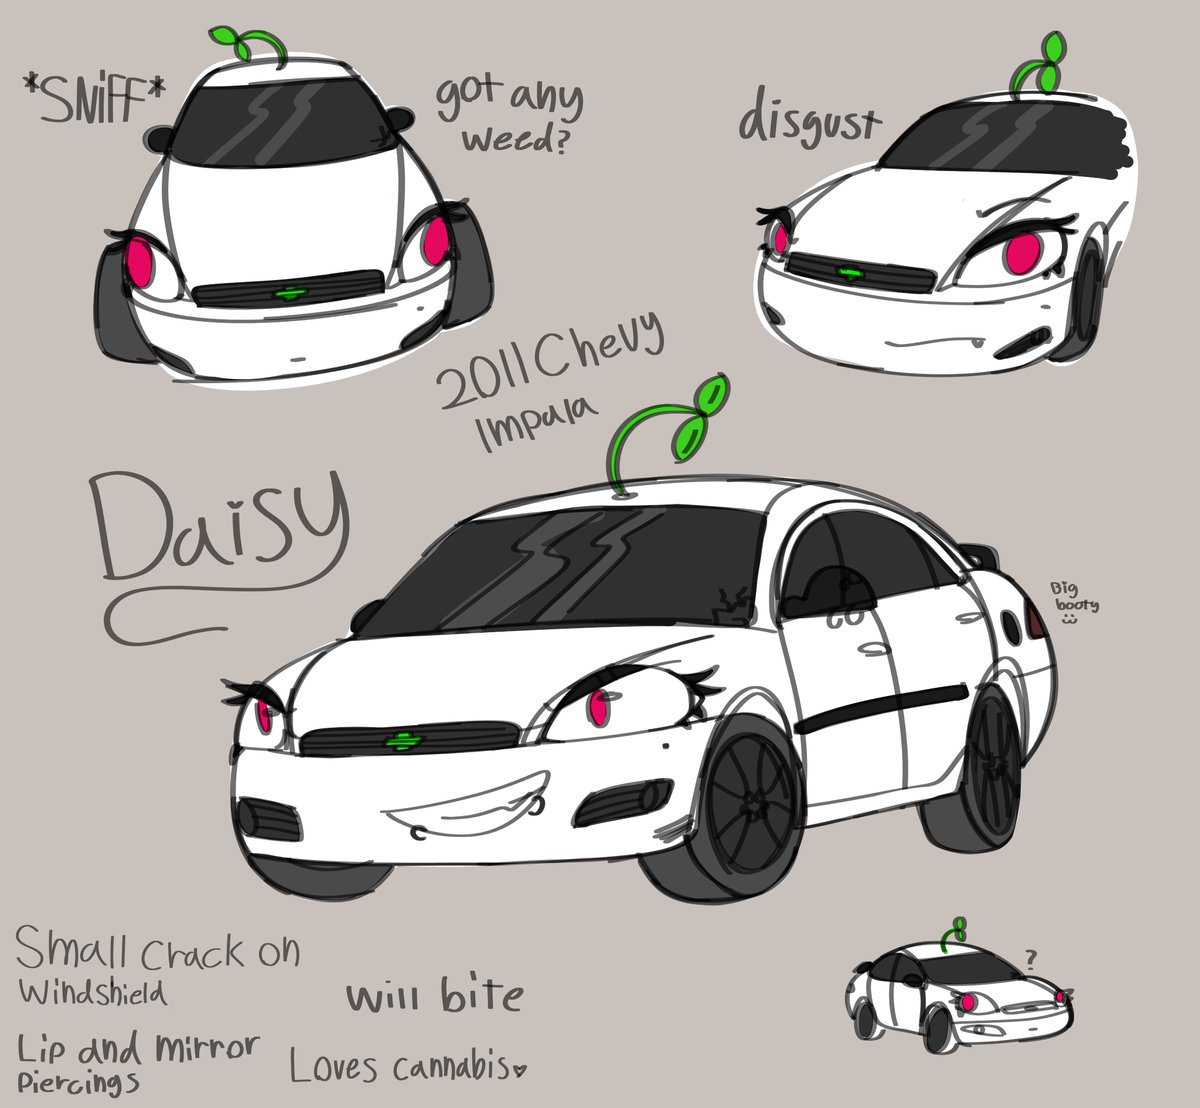 We're so back baby Hello everyone! As you may know, I wanted to start over from my old account @Mini_Miat . I will be using this account for my art now. :) Heres my new carsona, Daisy! It's just a rough sketch for now, but I like the way she turned out. #LM #livingmachine #art